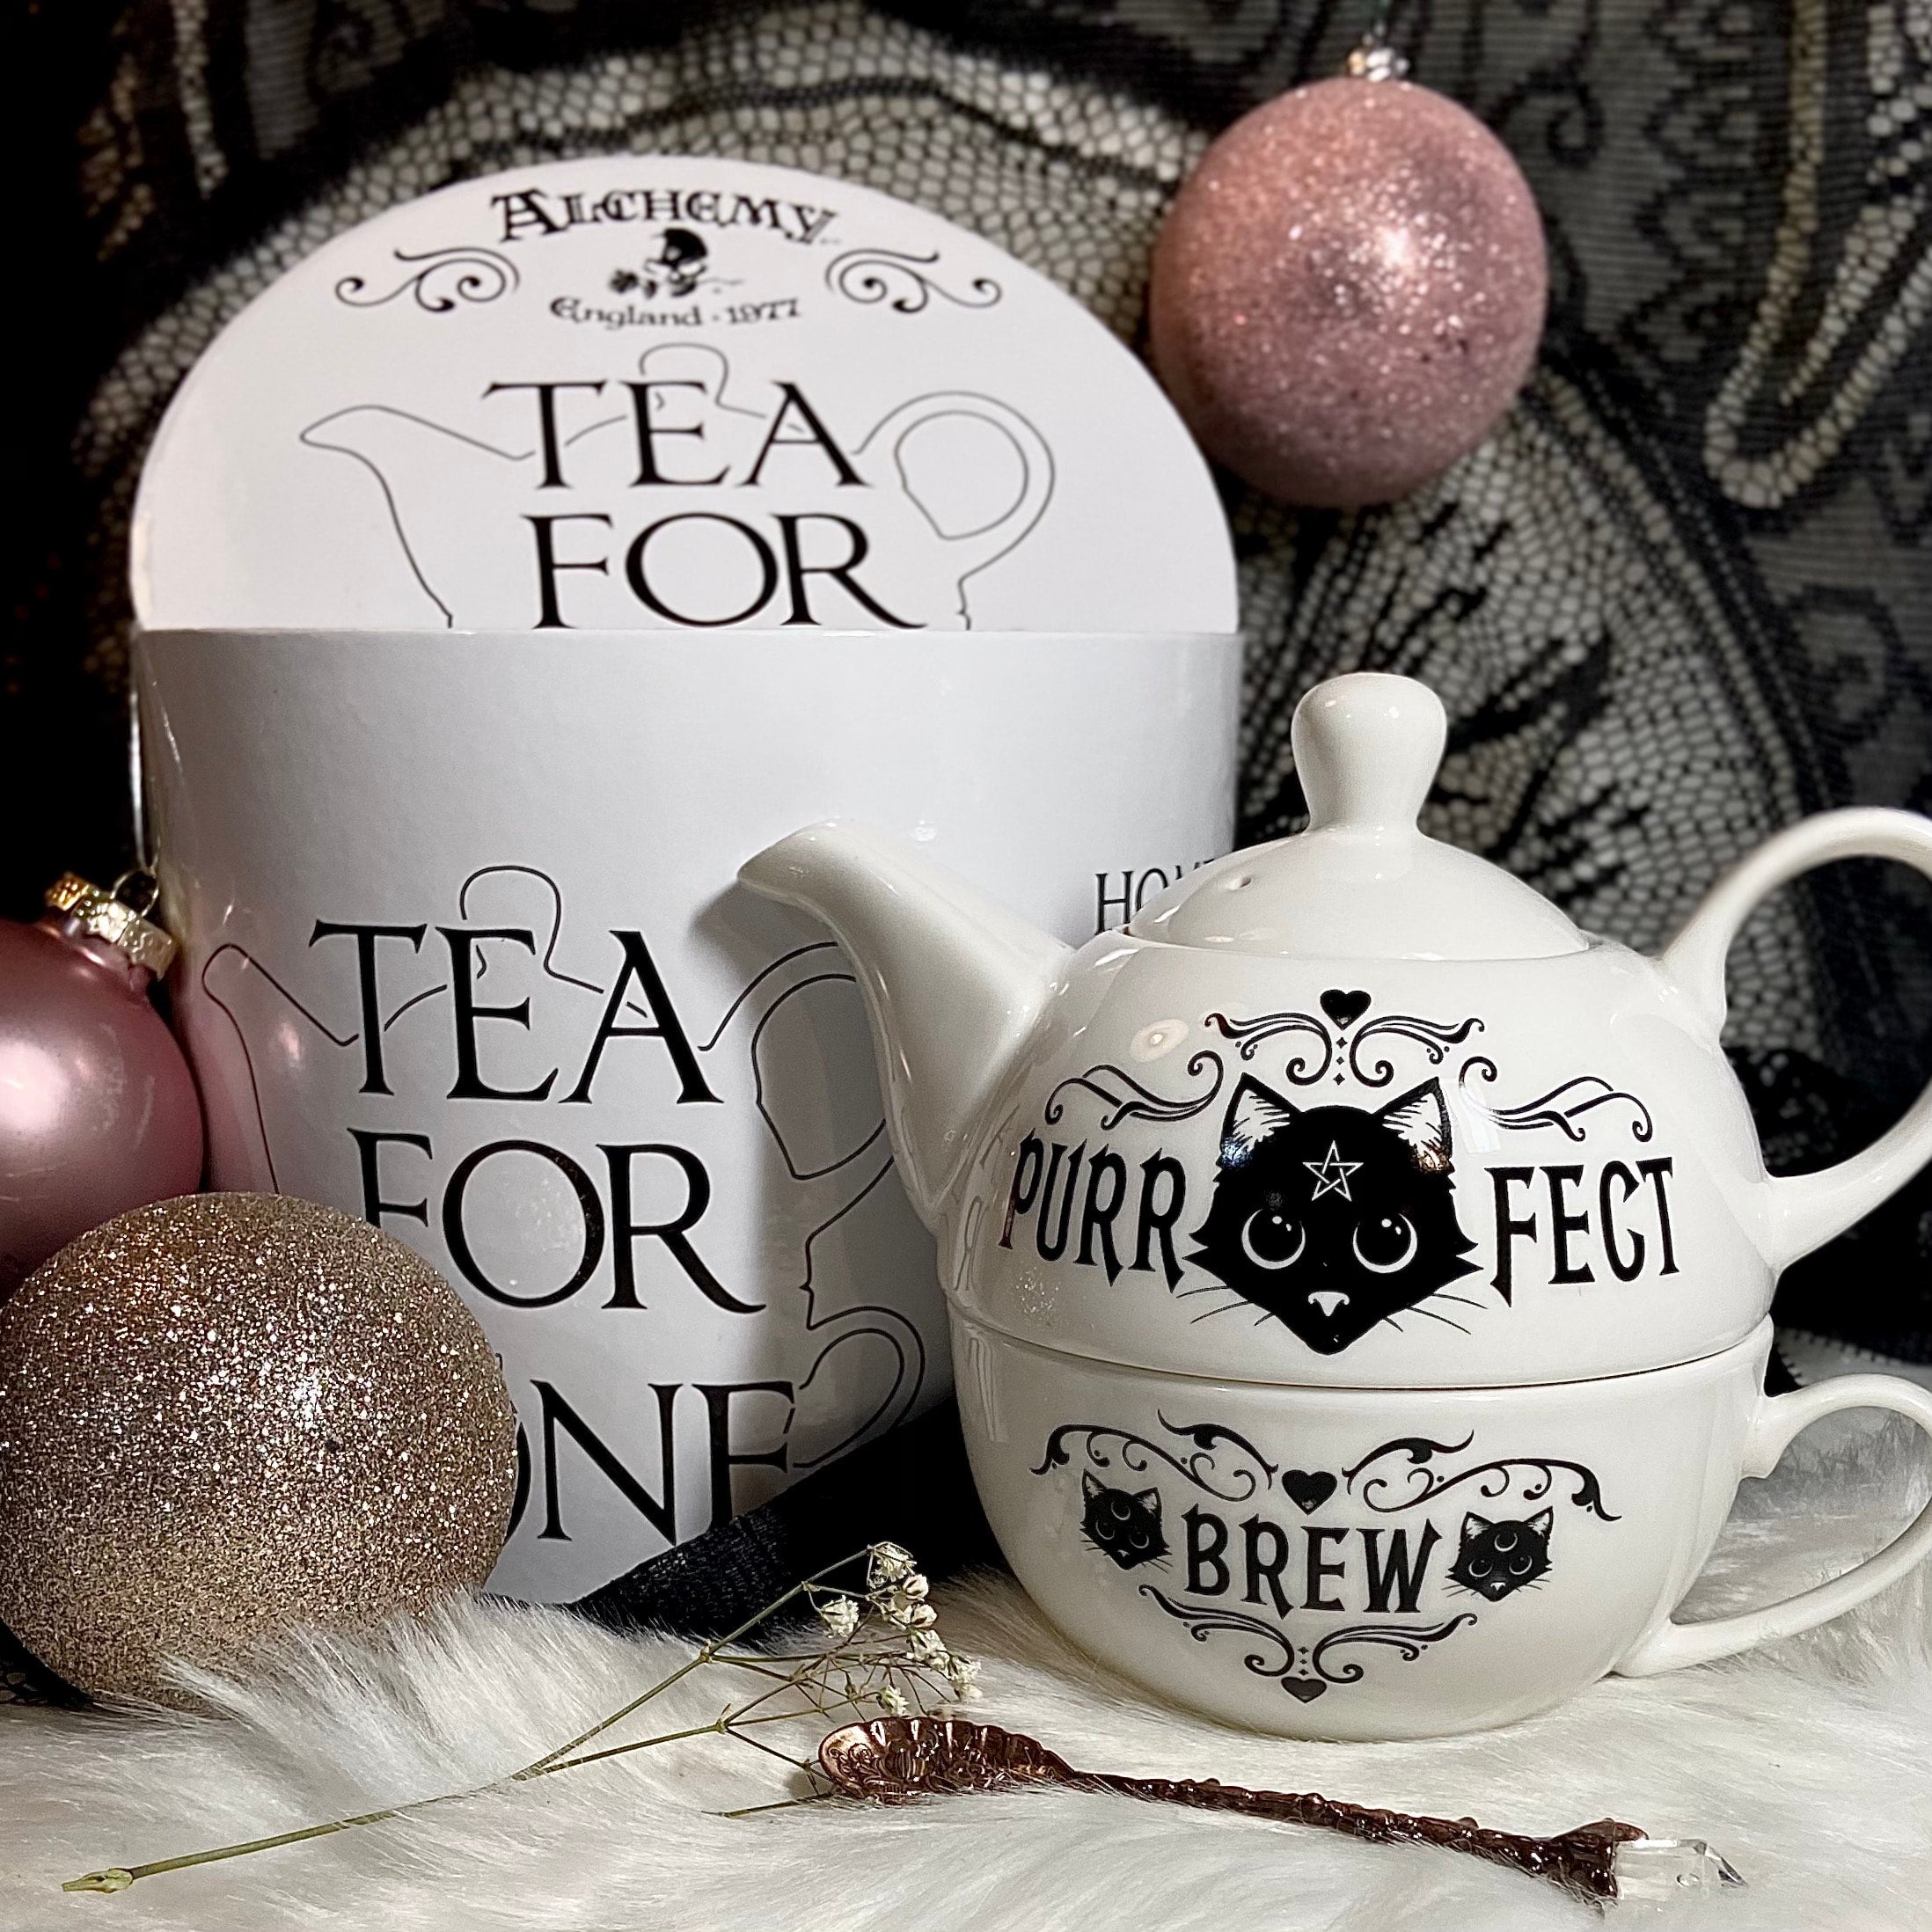 Purrfect Brew - Tea for One Set, Alchemy England Teapot